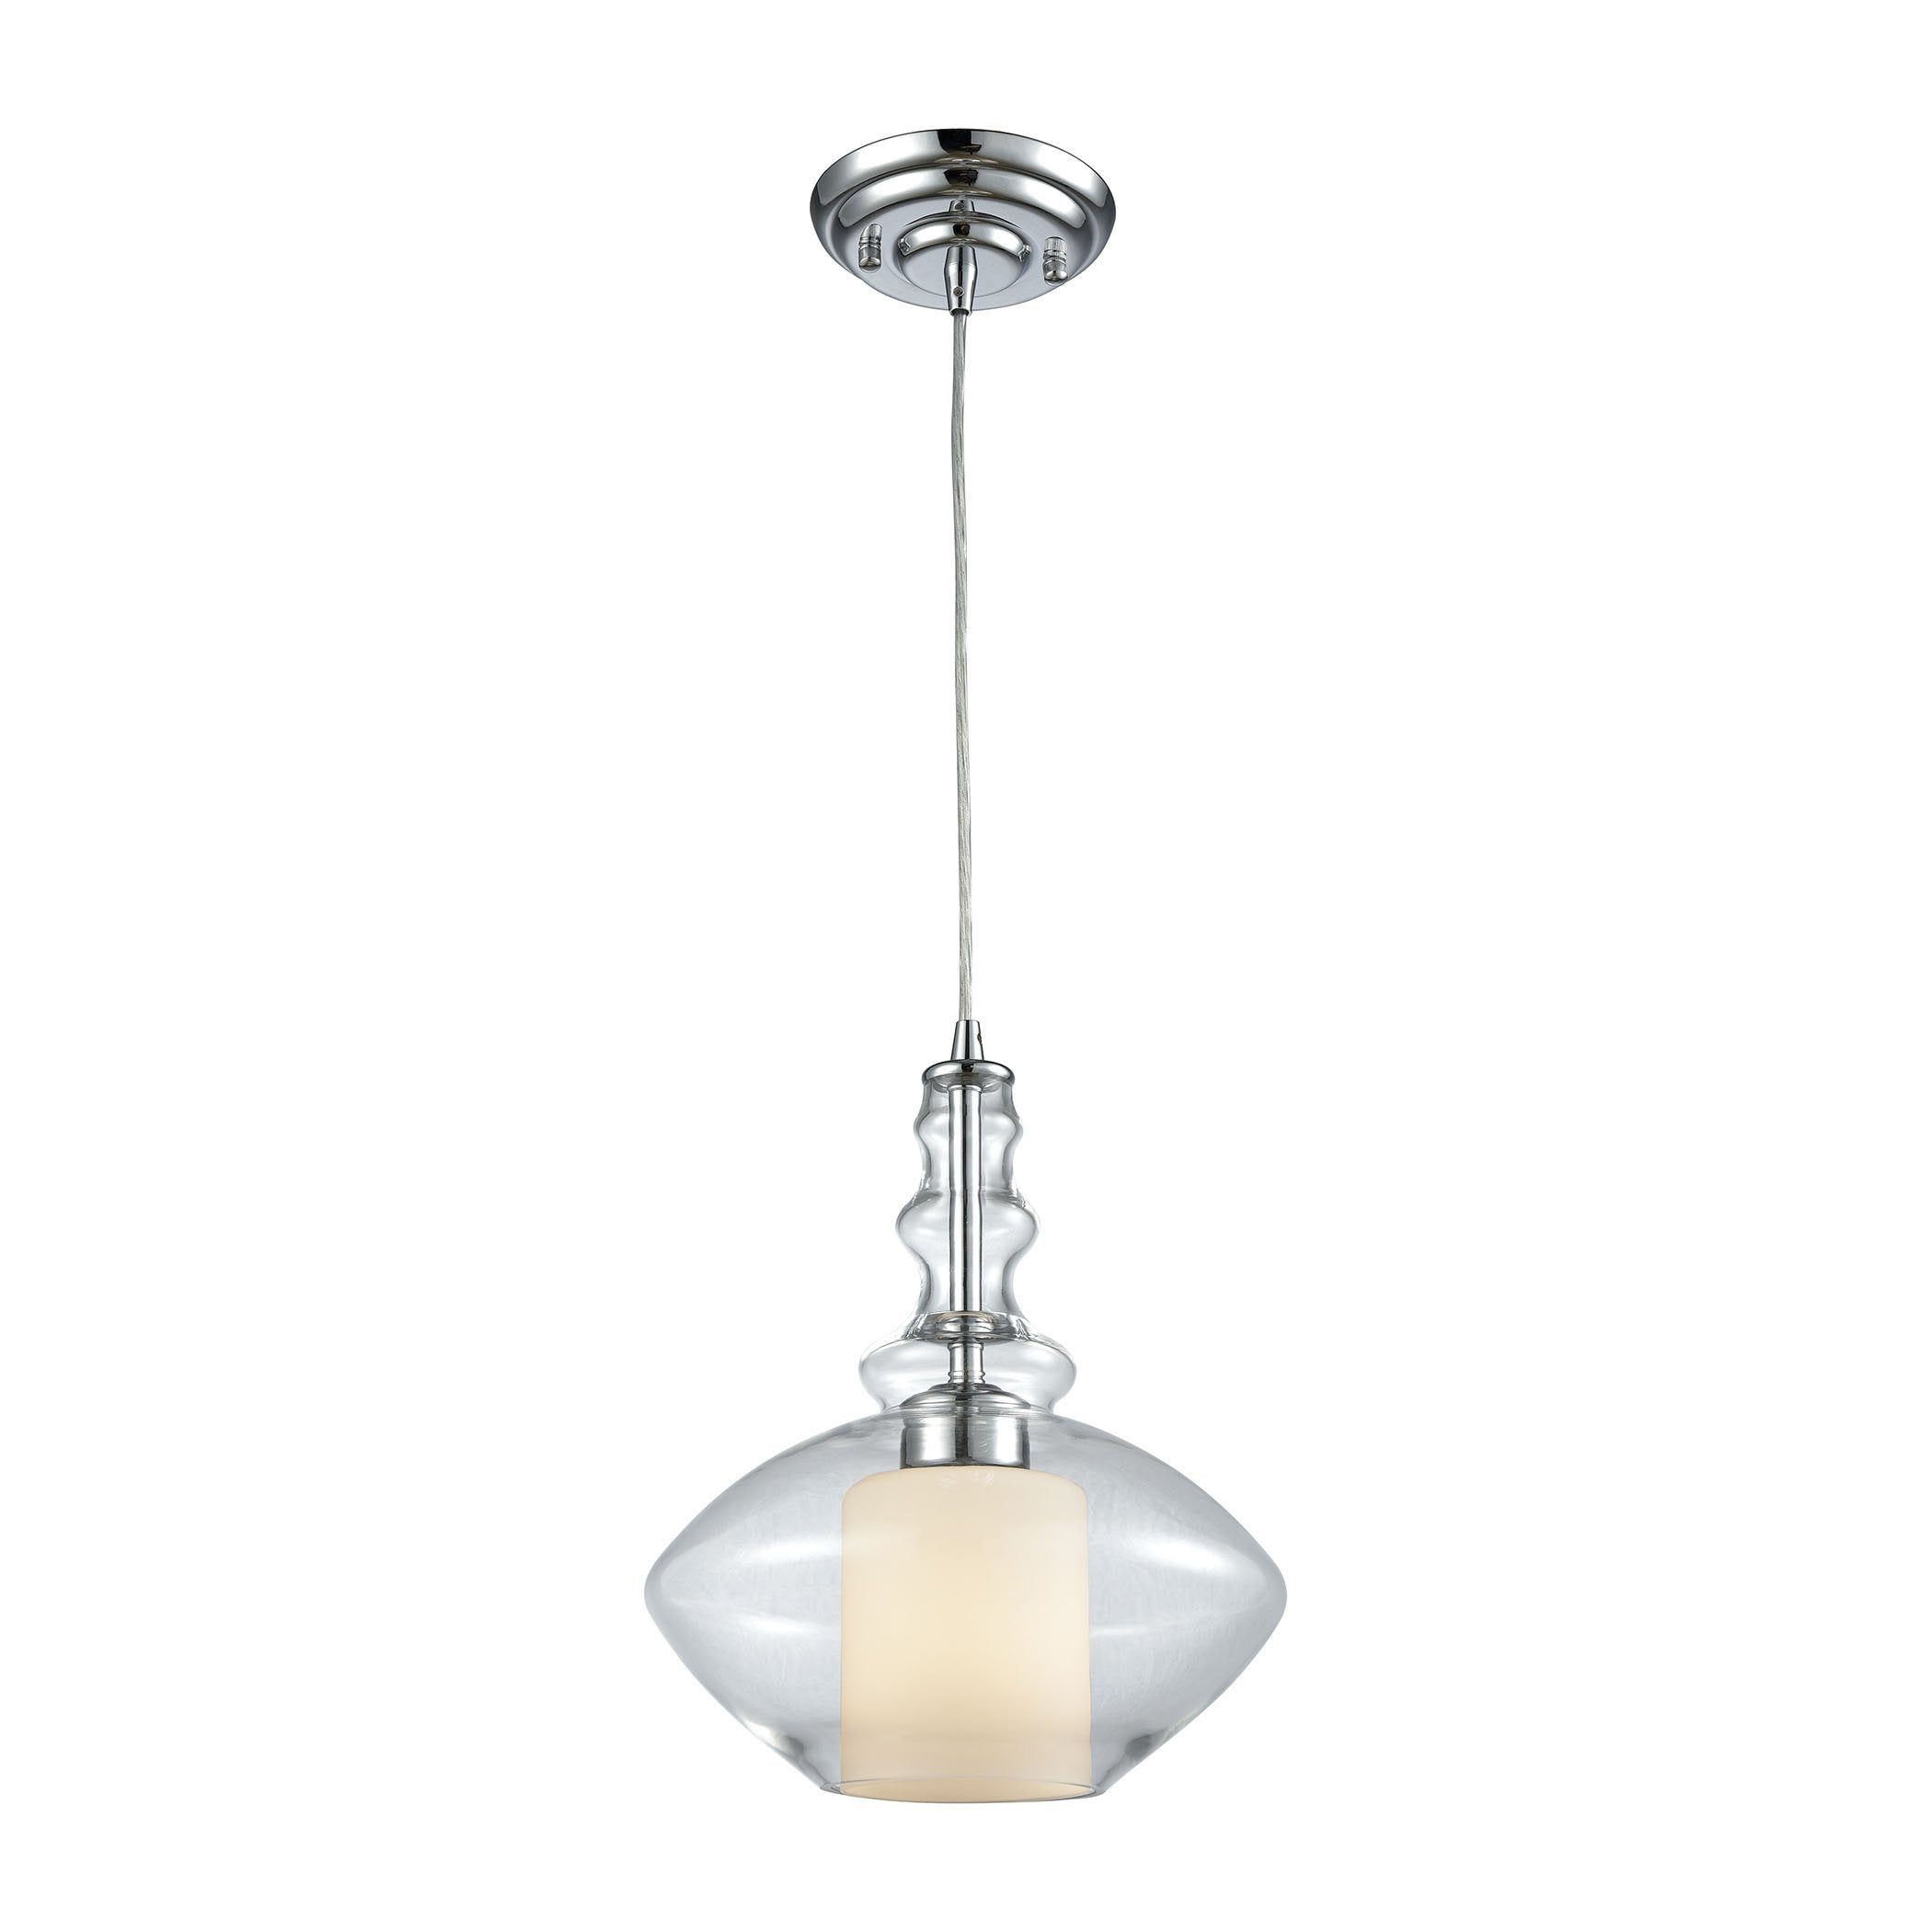 Alora 1 Light Pendant in Polished Chrome with Opal White and Clear Glass - Includes Recessed Lightin Ceiling Elk Lighting 